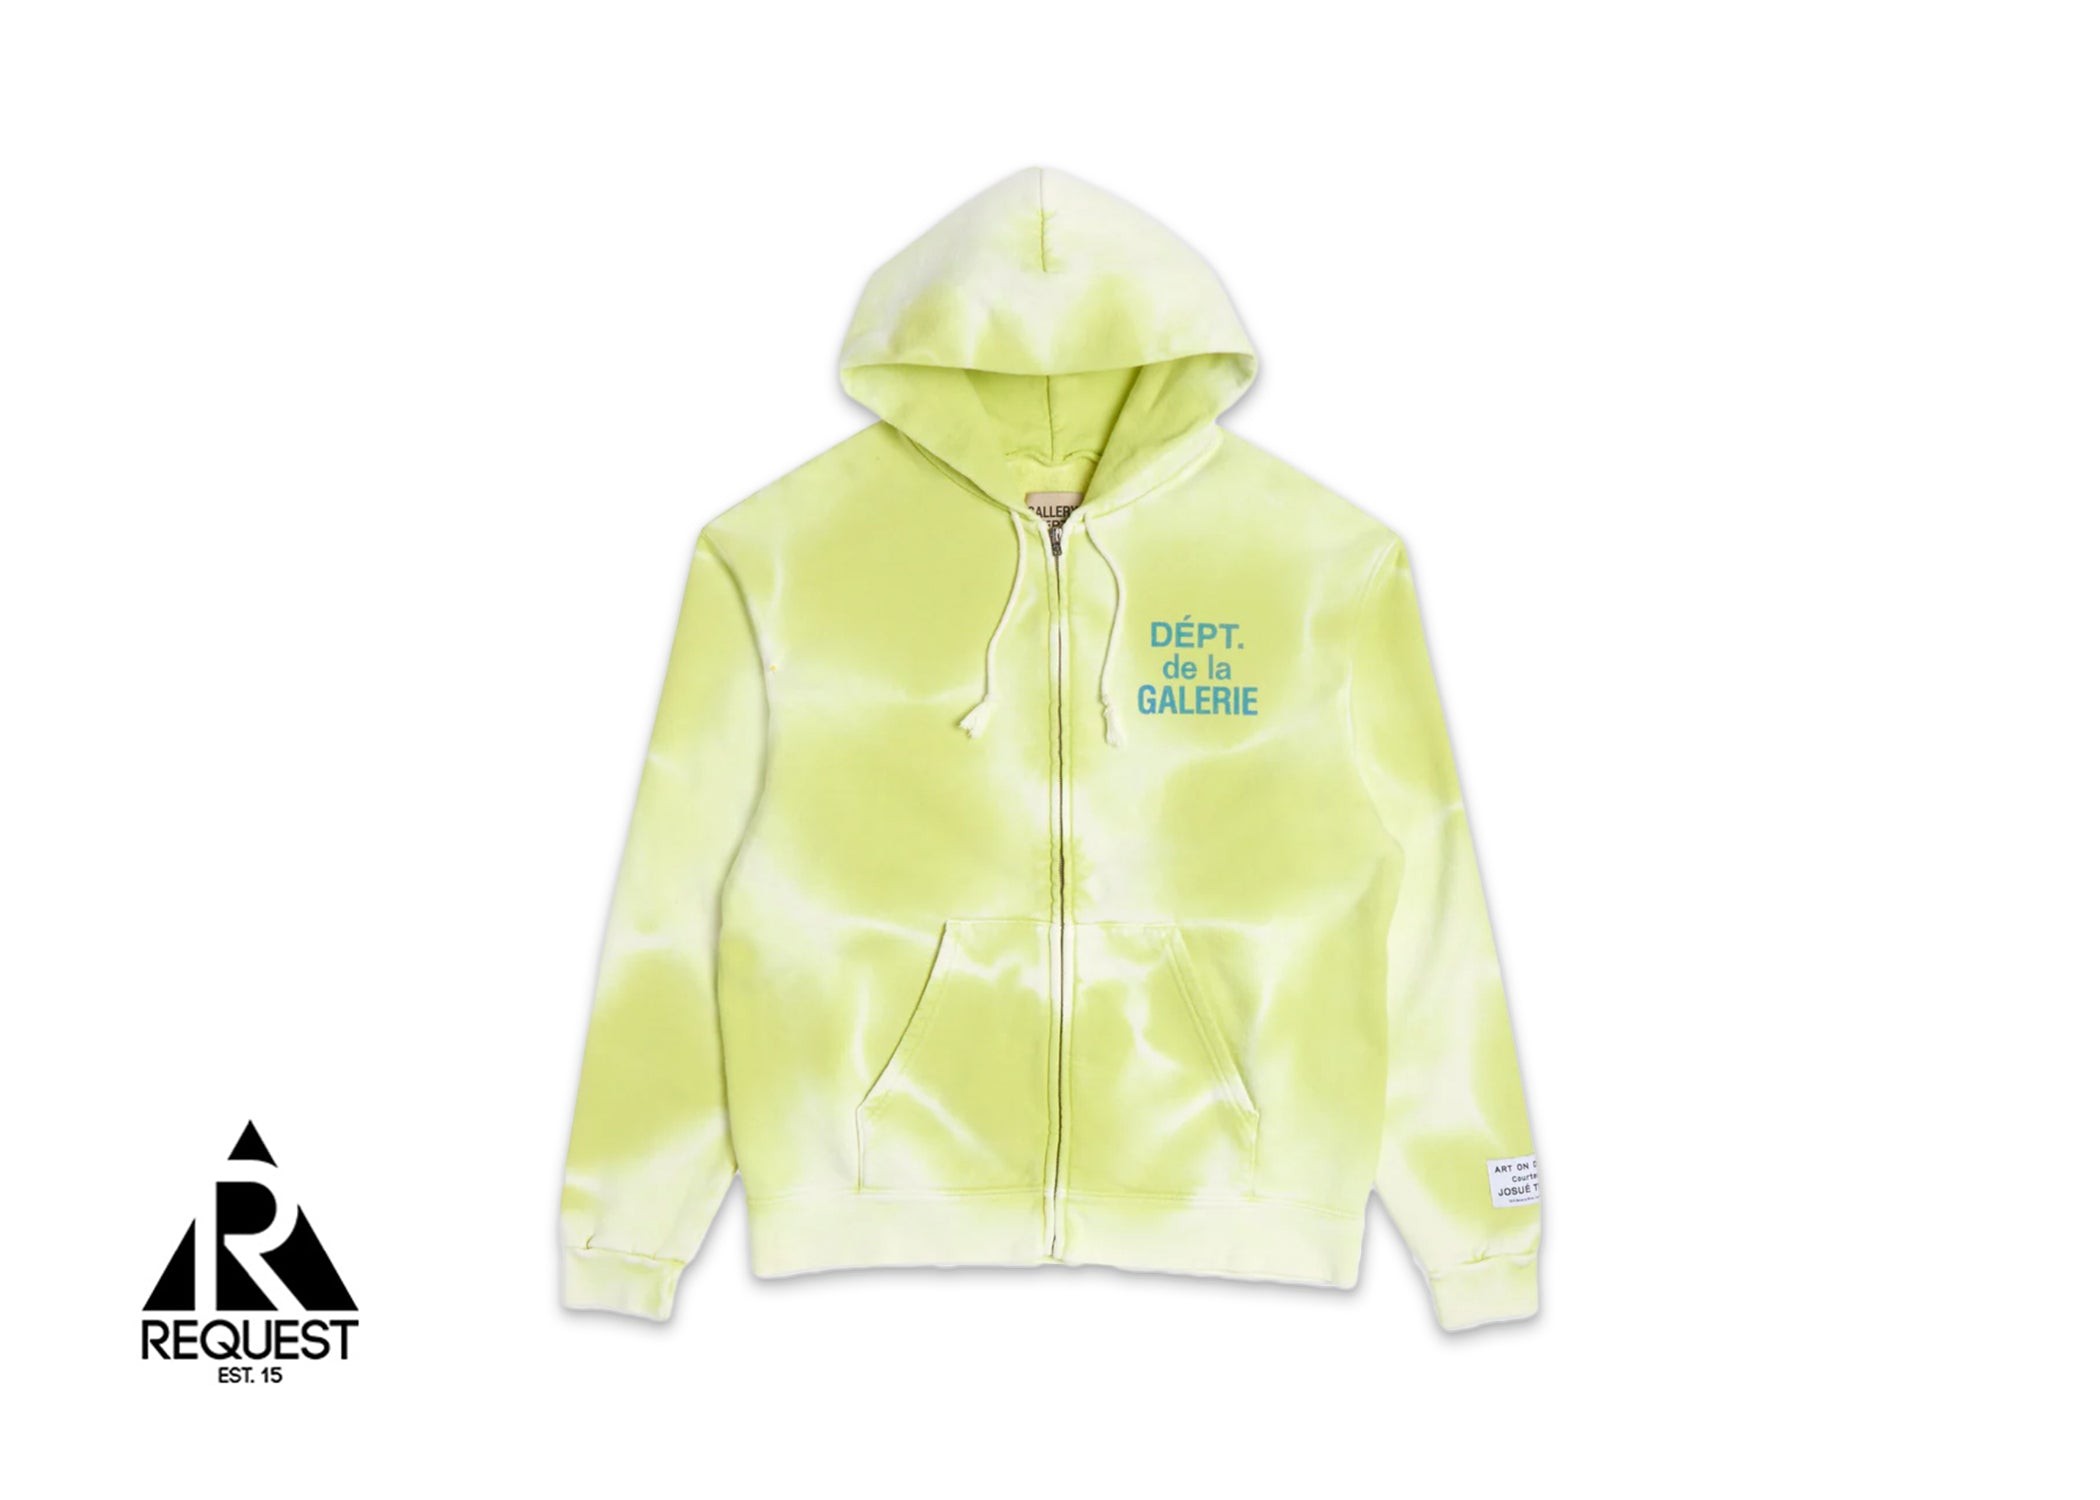 Gallery Dept. French Zip Up "Lime Green"